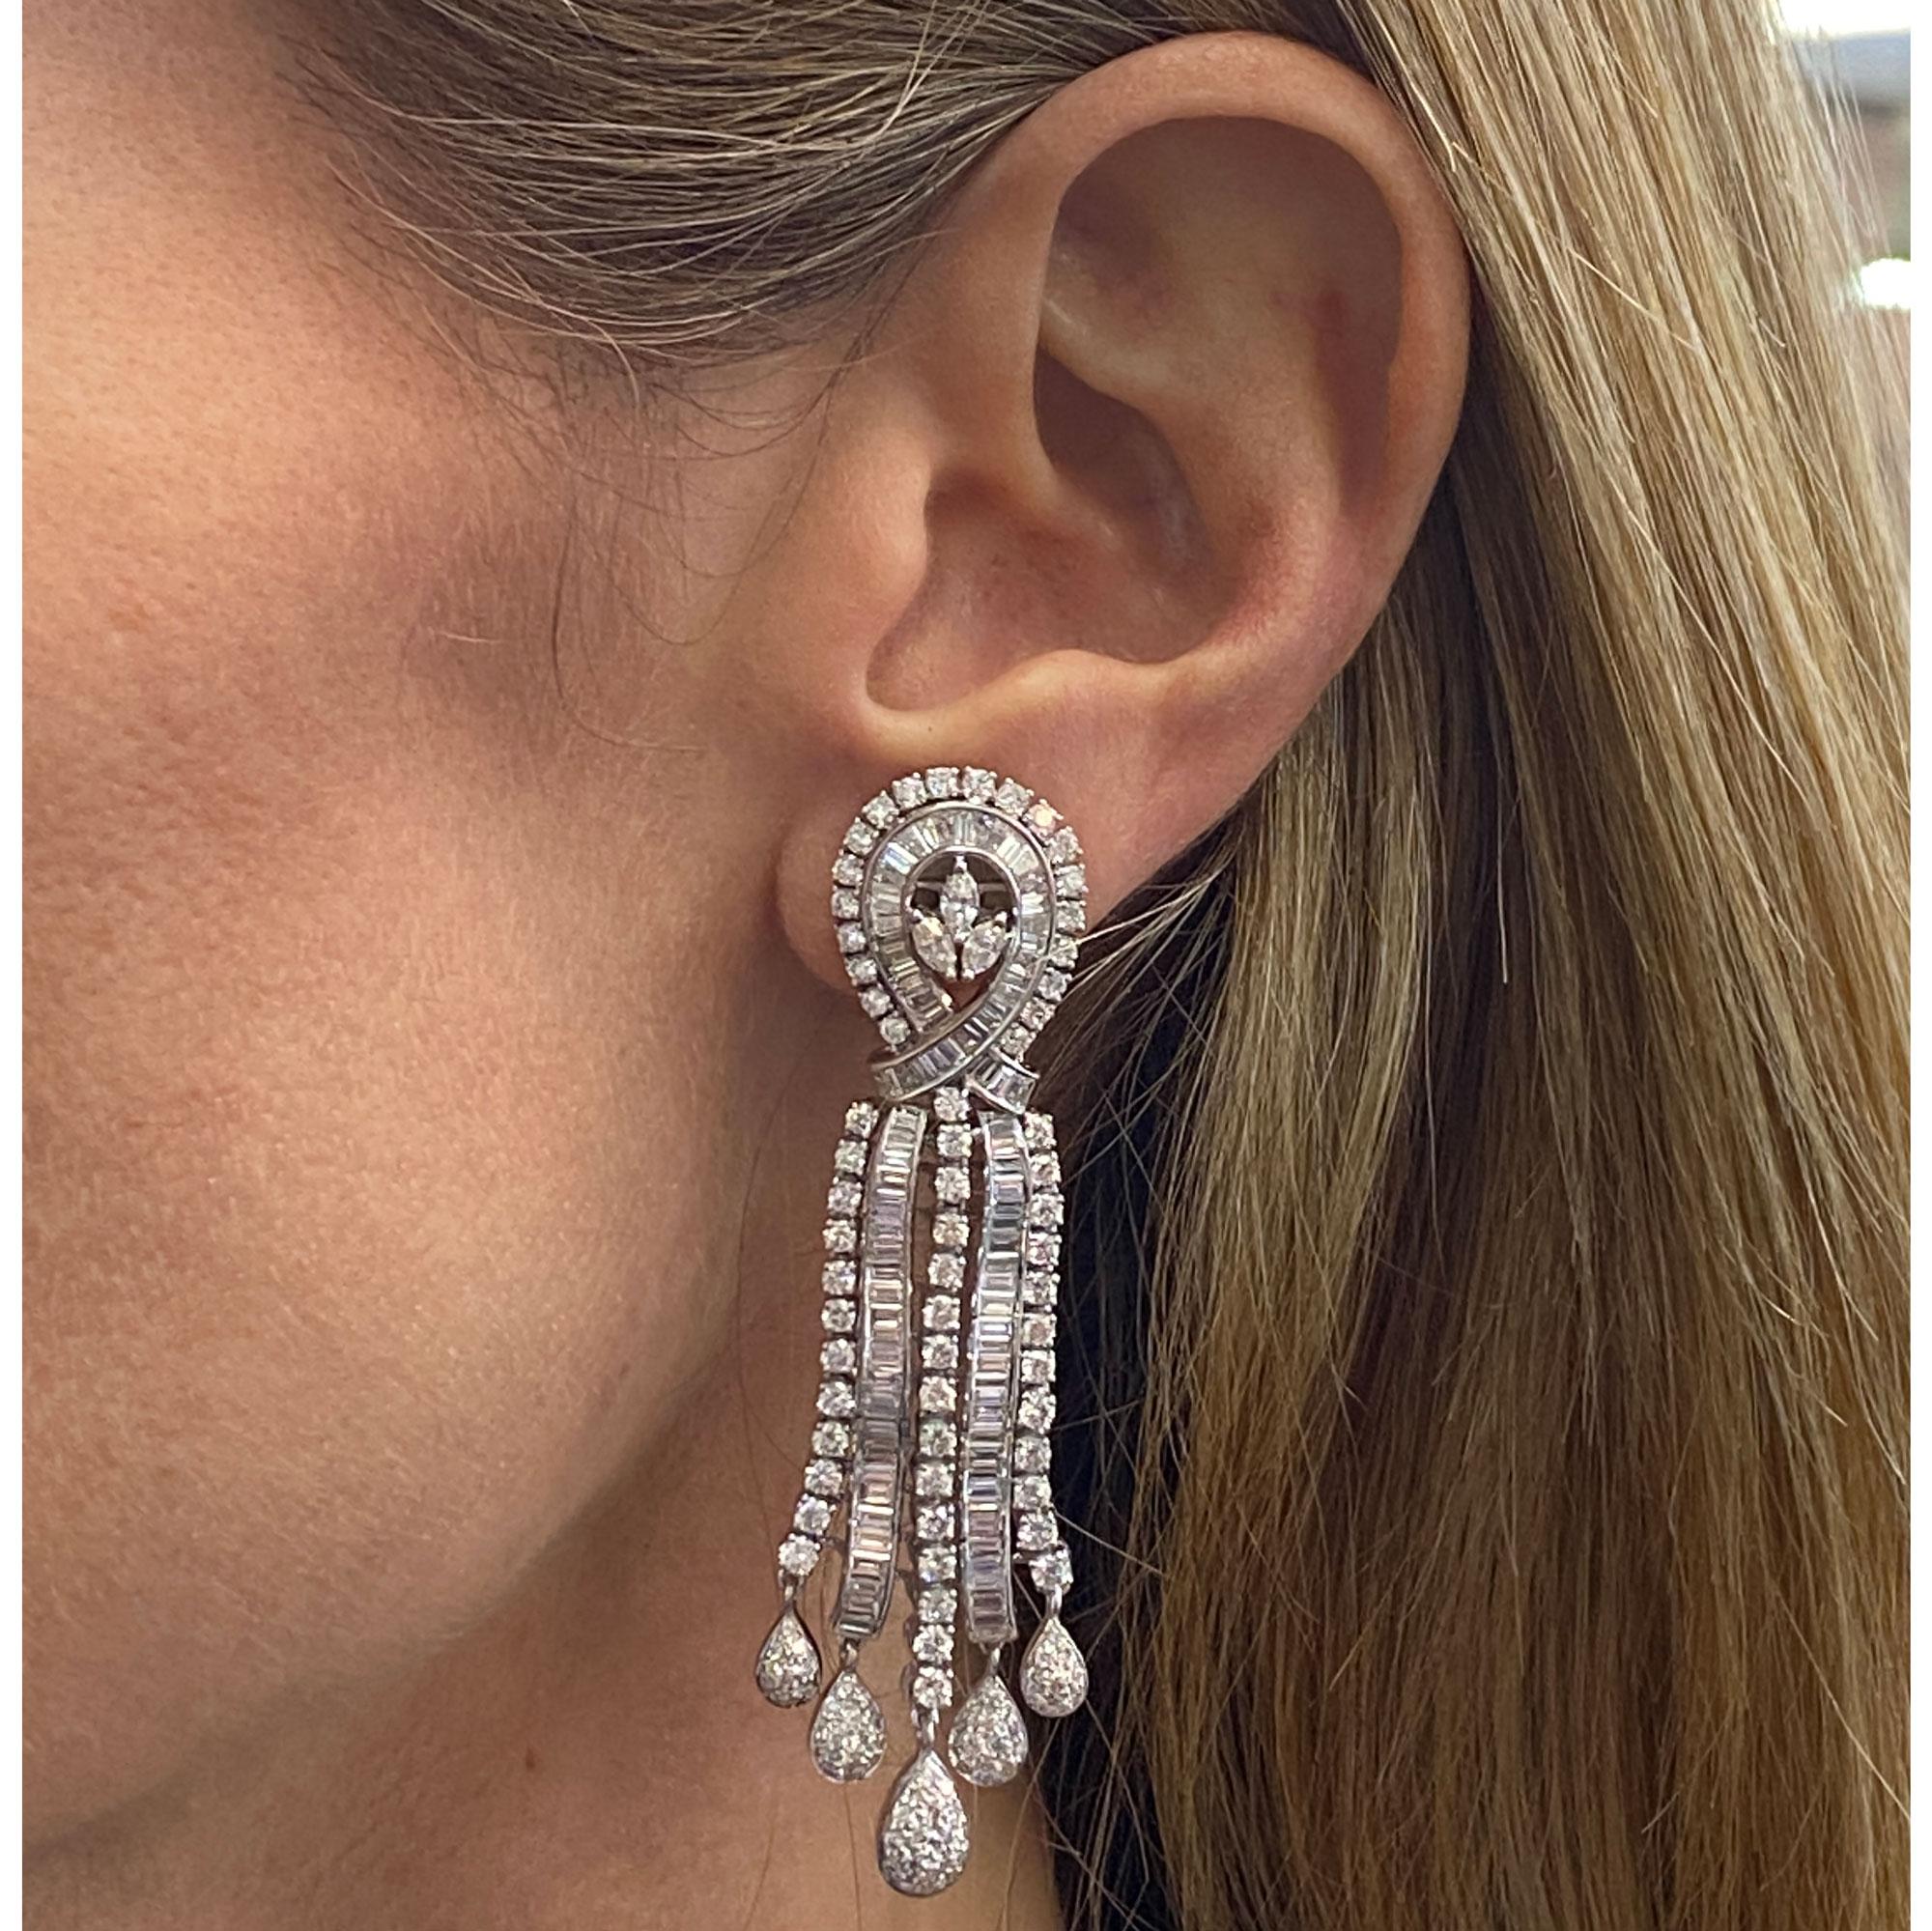 Incredibly elegant diamond chandelier earrings circa 1940-1950's. These long drop earrings feature approximately 10.0 carat total weight diamonds. The diamonds are marquise, round brilliant, and baguette cut diamonds all graded G-H color and VS